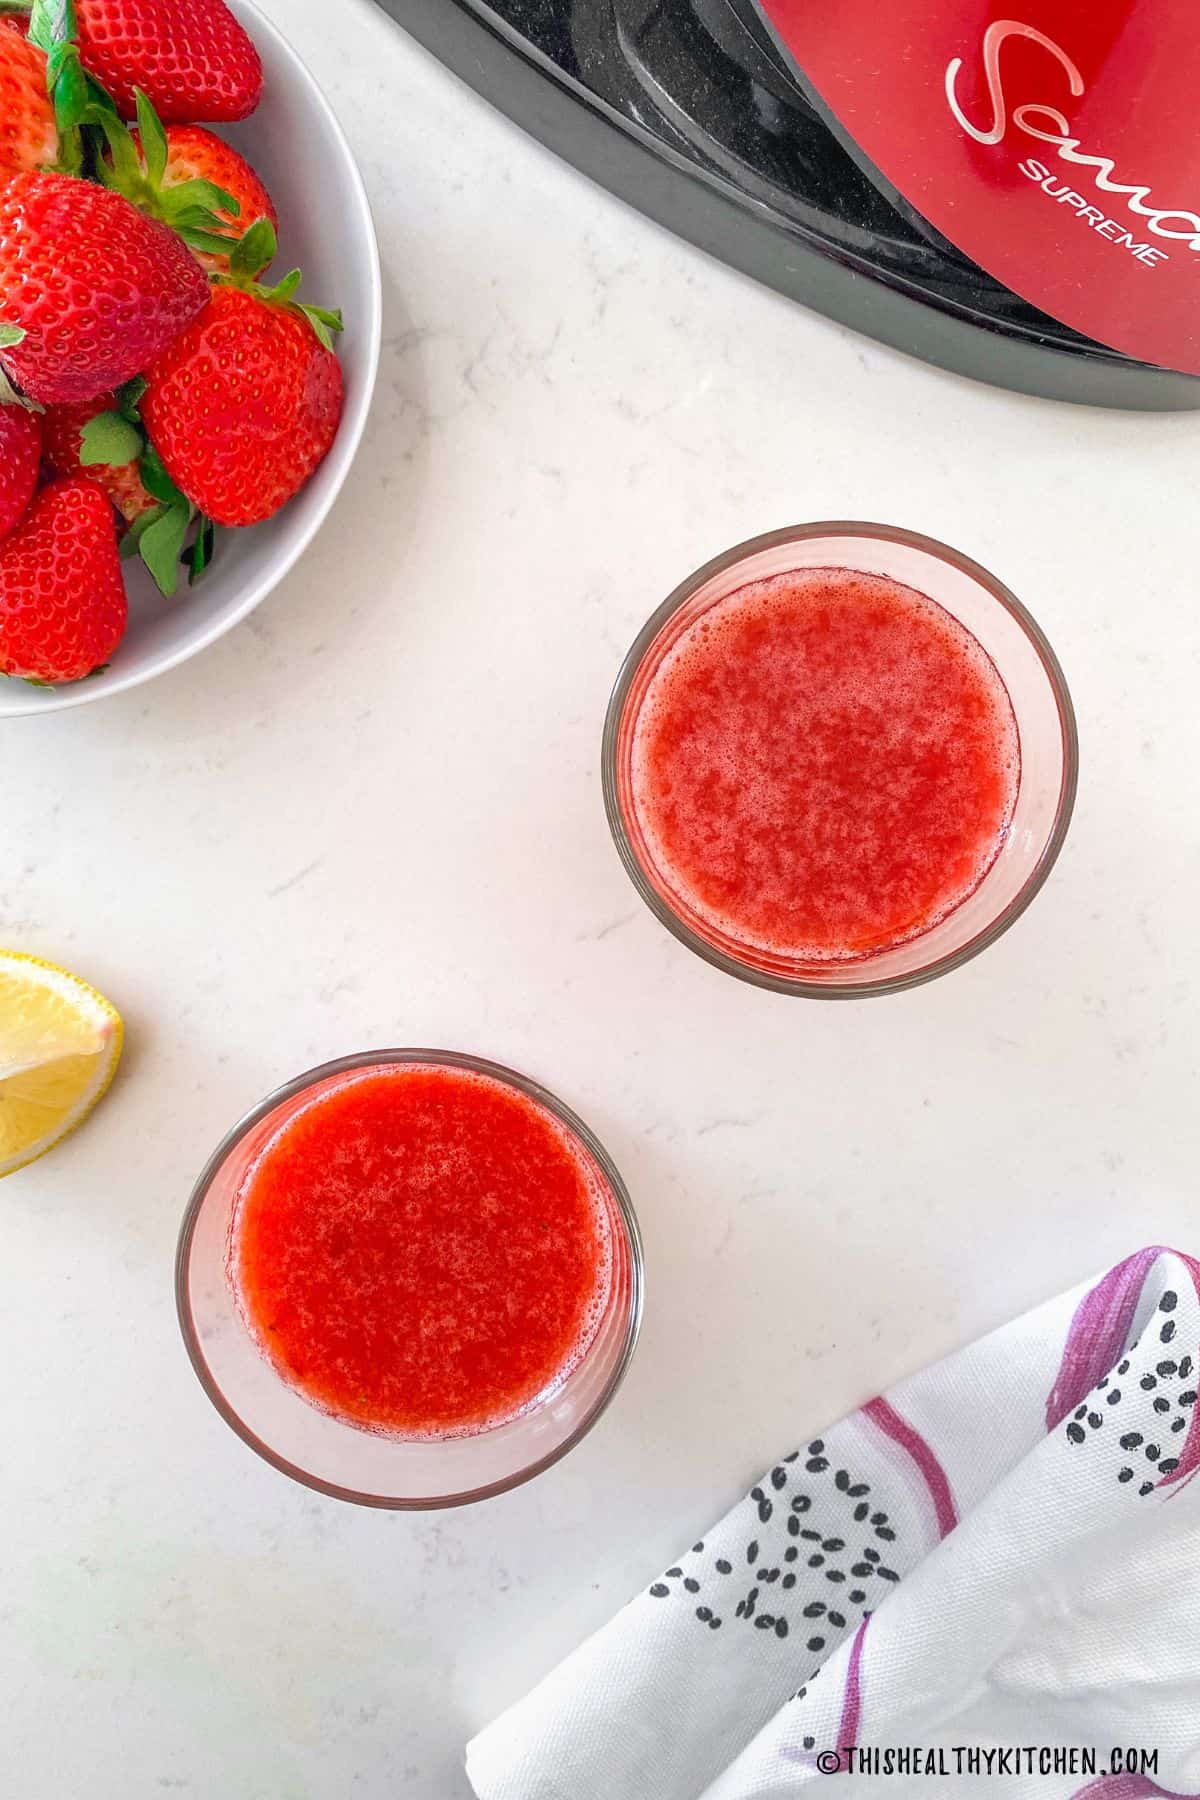 Overhead view of two glasses of red juice with bowl of strawberries beside them.